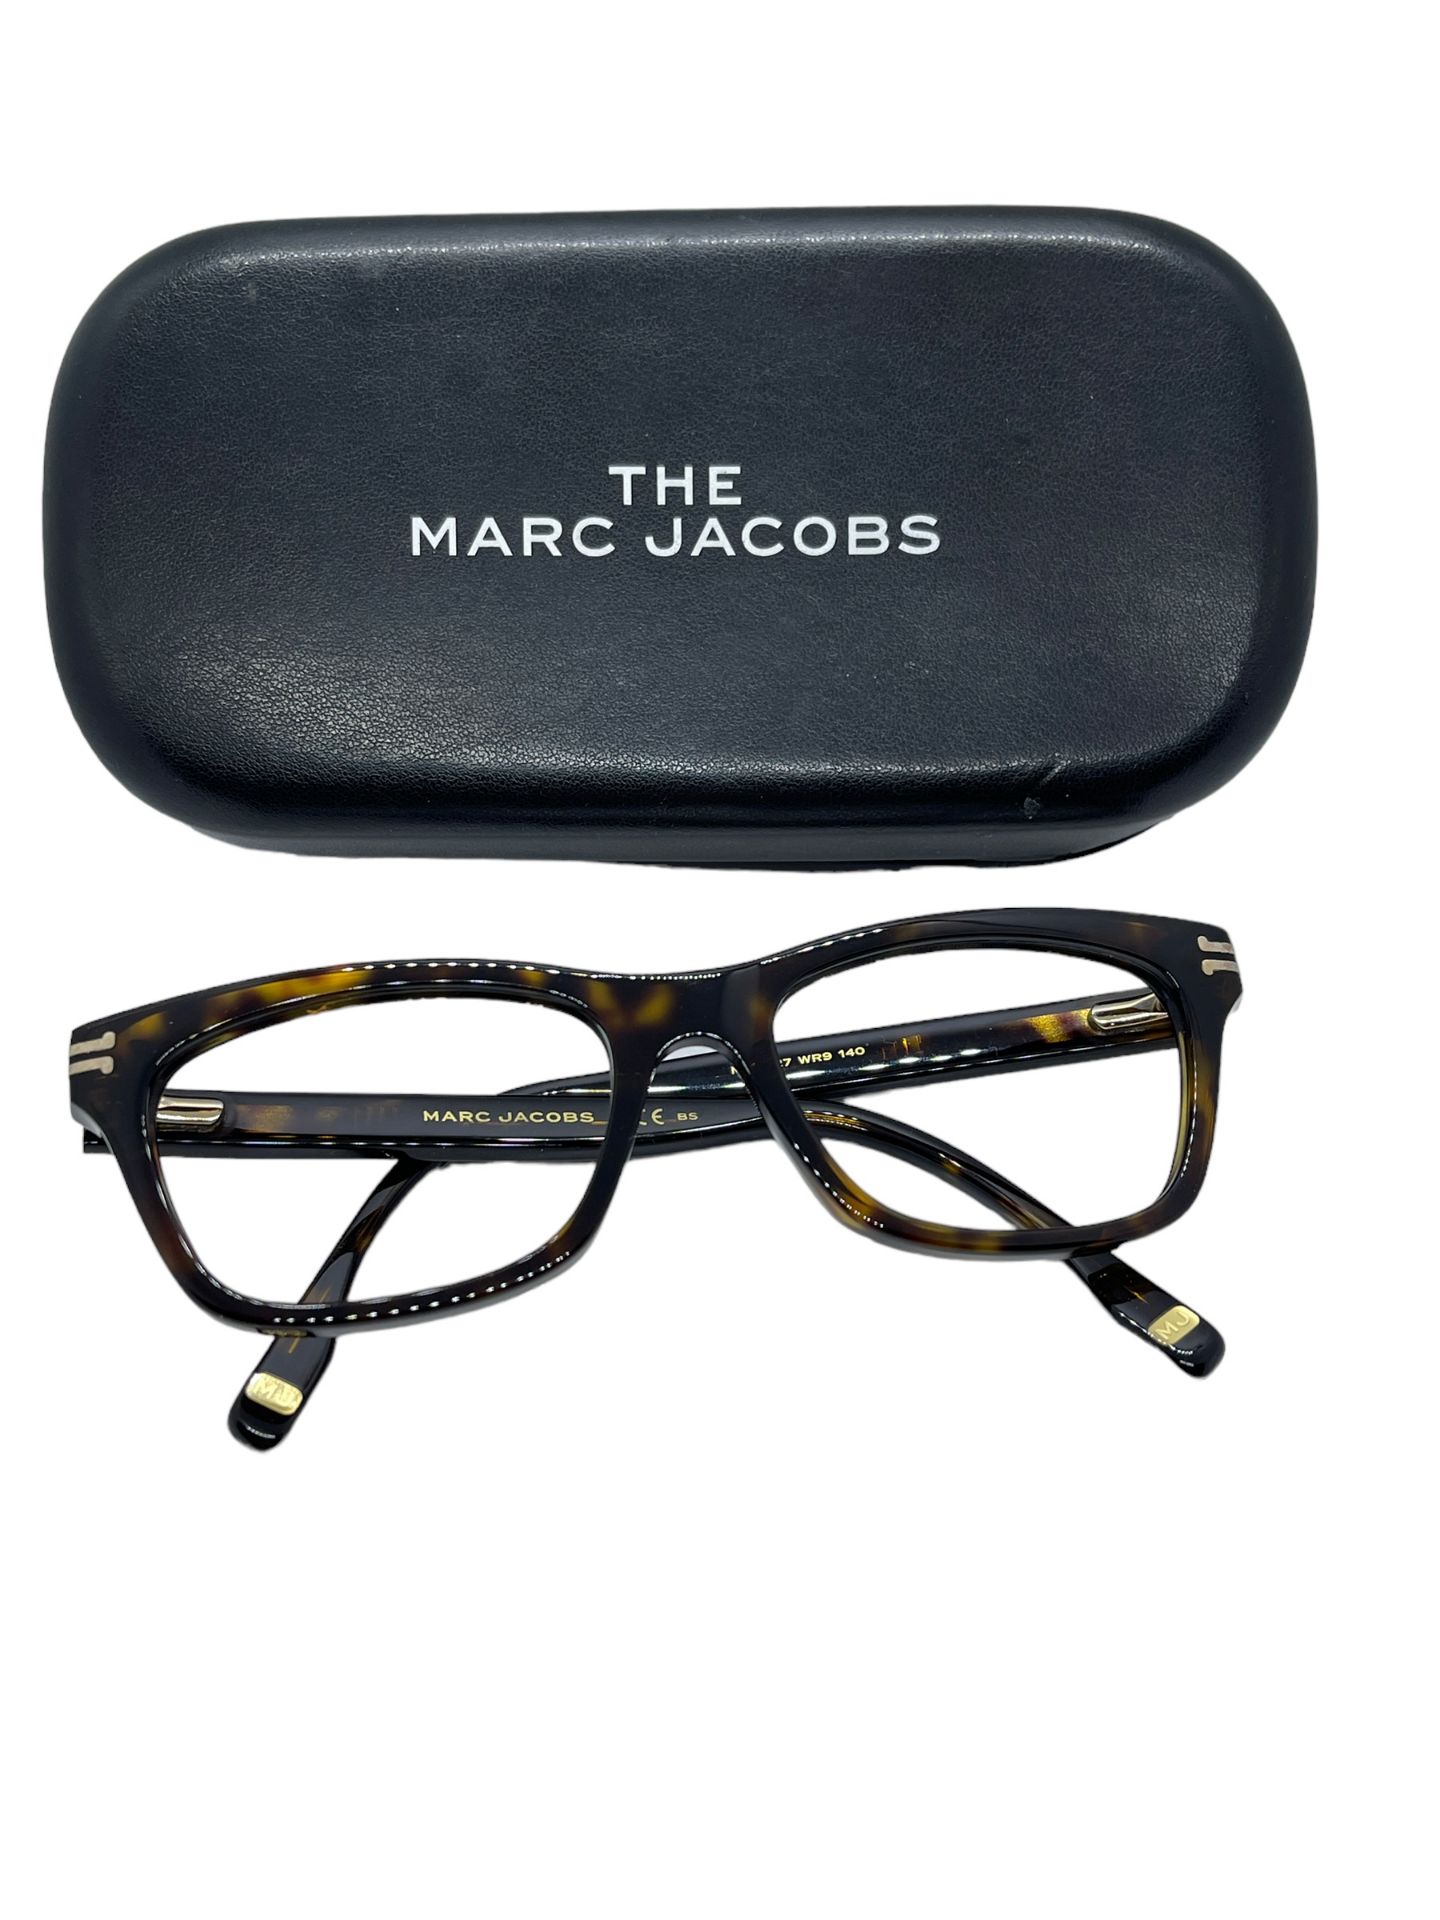 Marc Jacob's new spectacles mens. - Image 2 of 9